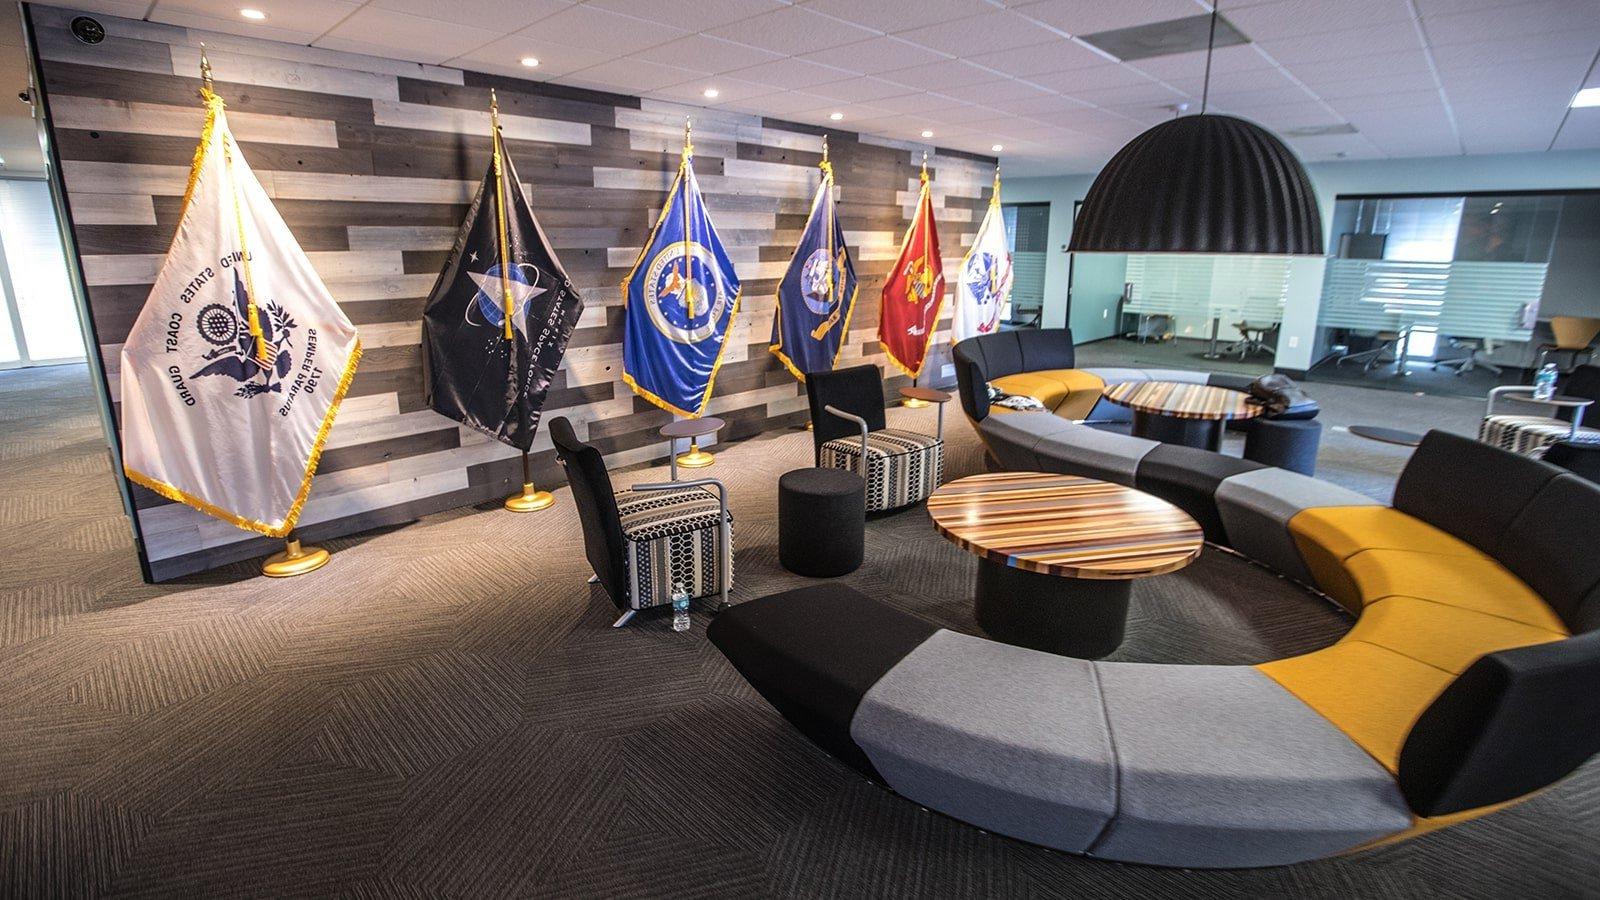 An image of Full Sail’s Military Student Success center shows a large couch, small meeting rooms, and flags representing each branch of the US Armed Services.